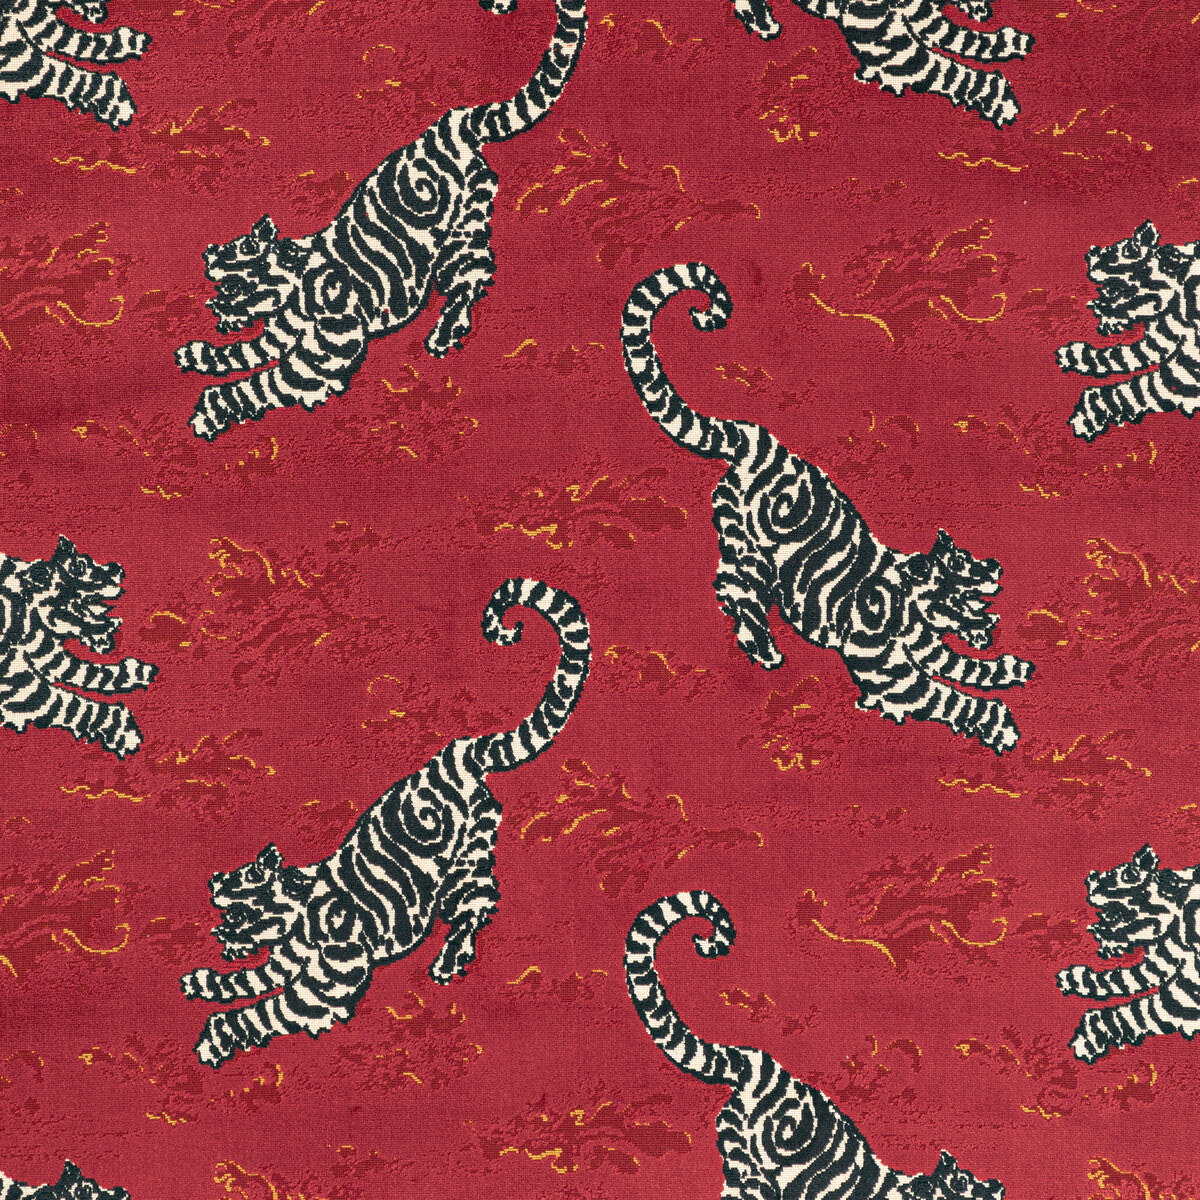 Bongol Velvet fabric in crimson color - pattern 2020200.198.0 - by Lee Jofa in the Mindoro collection